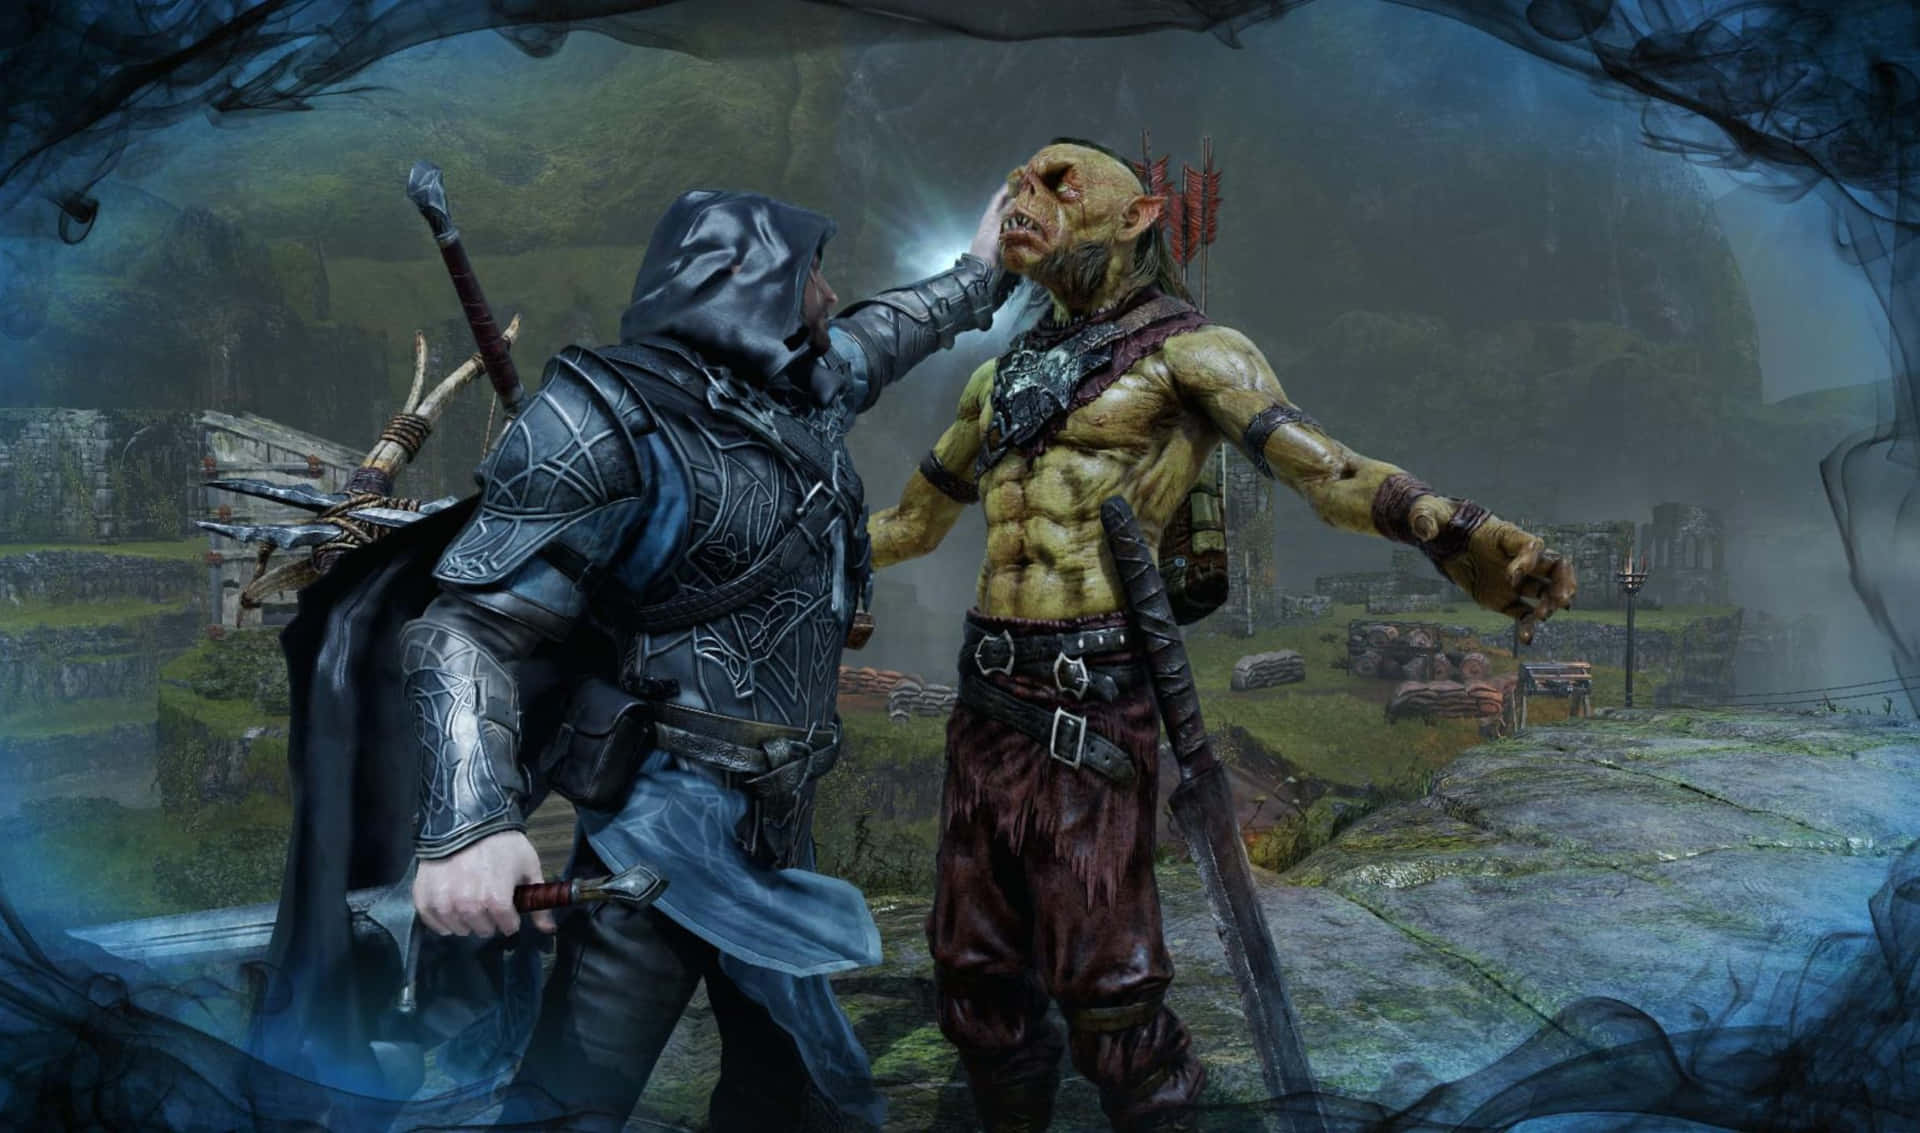 Embark on an Epic Adventure in Mordor with Shadow of Mordor